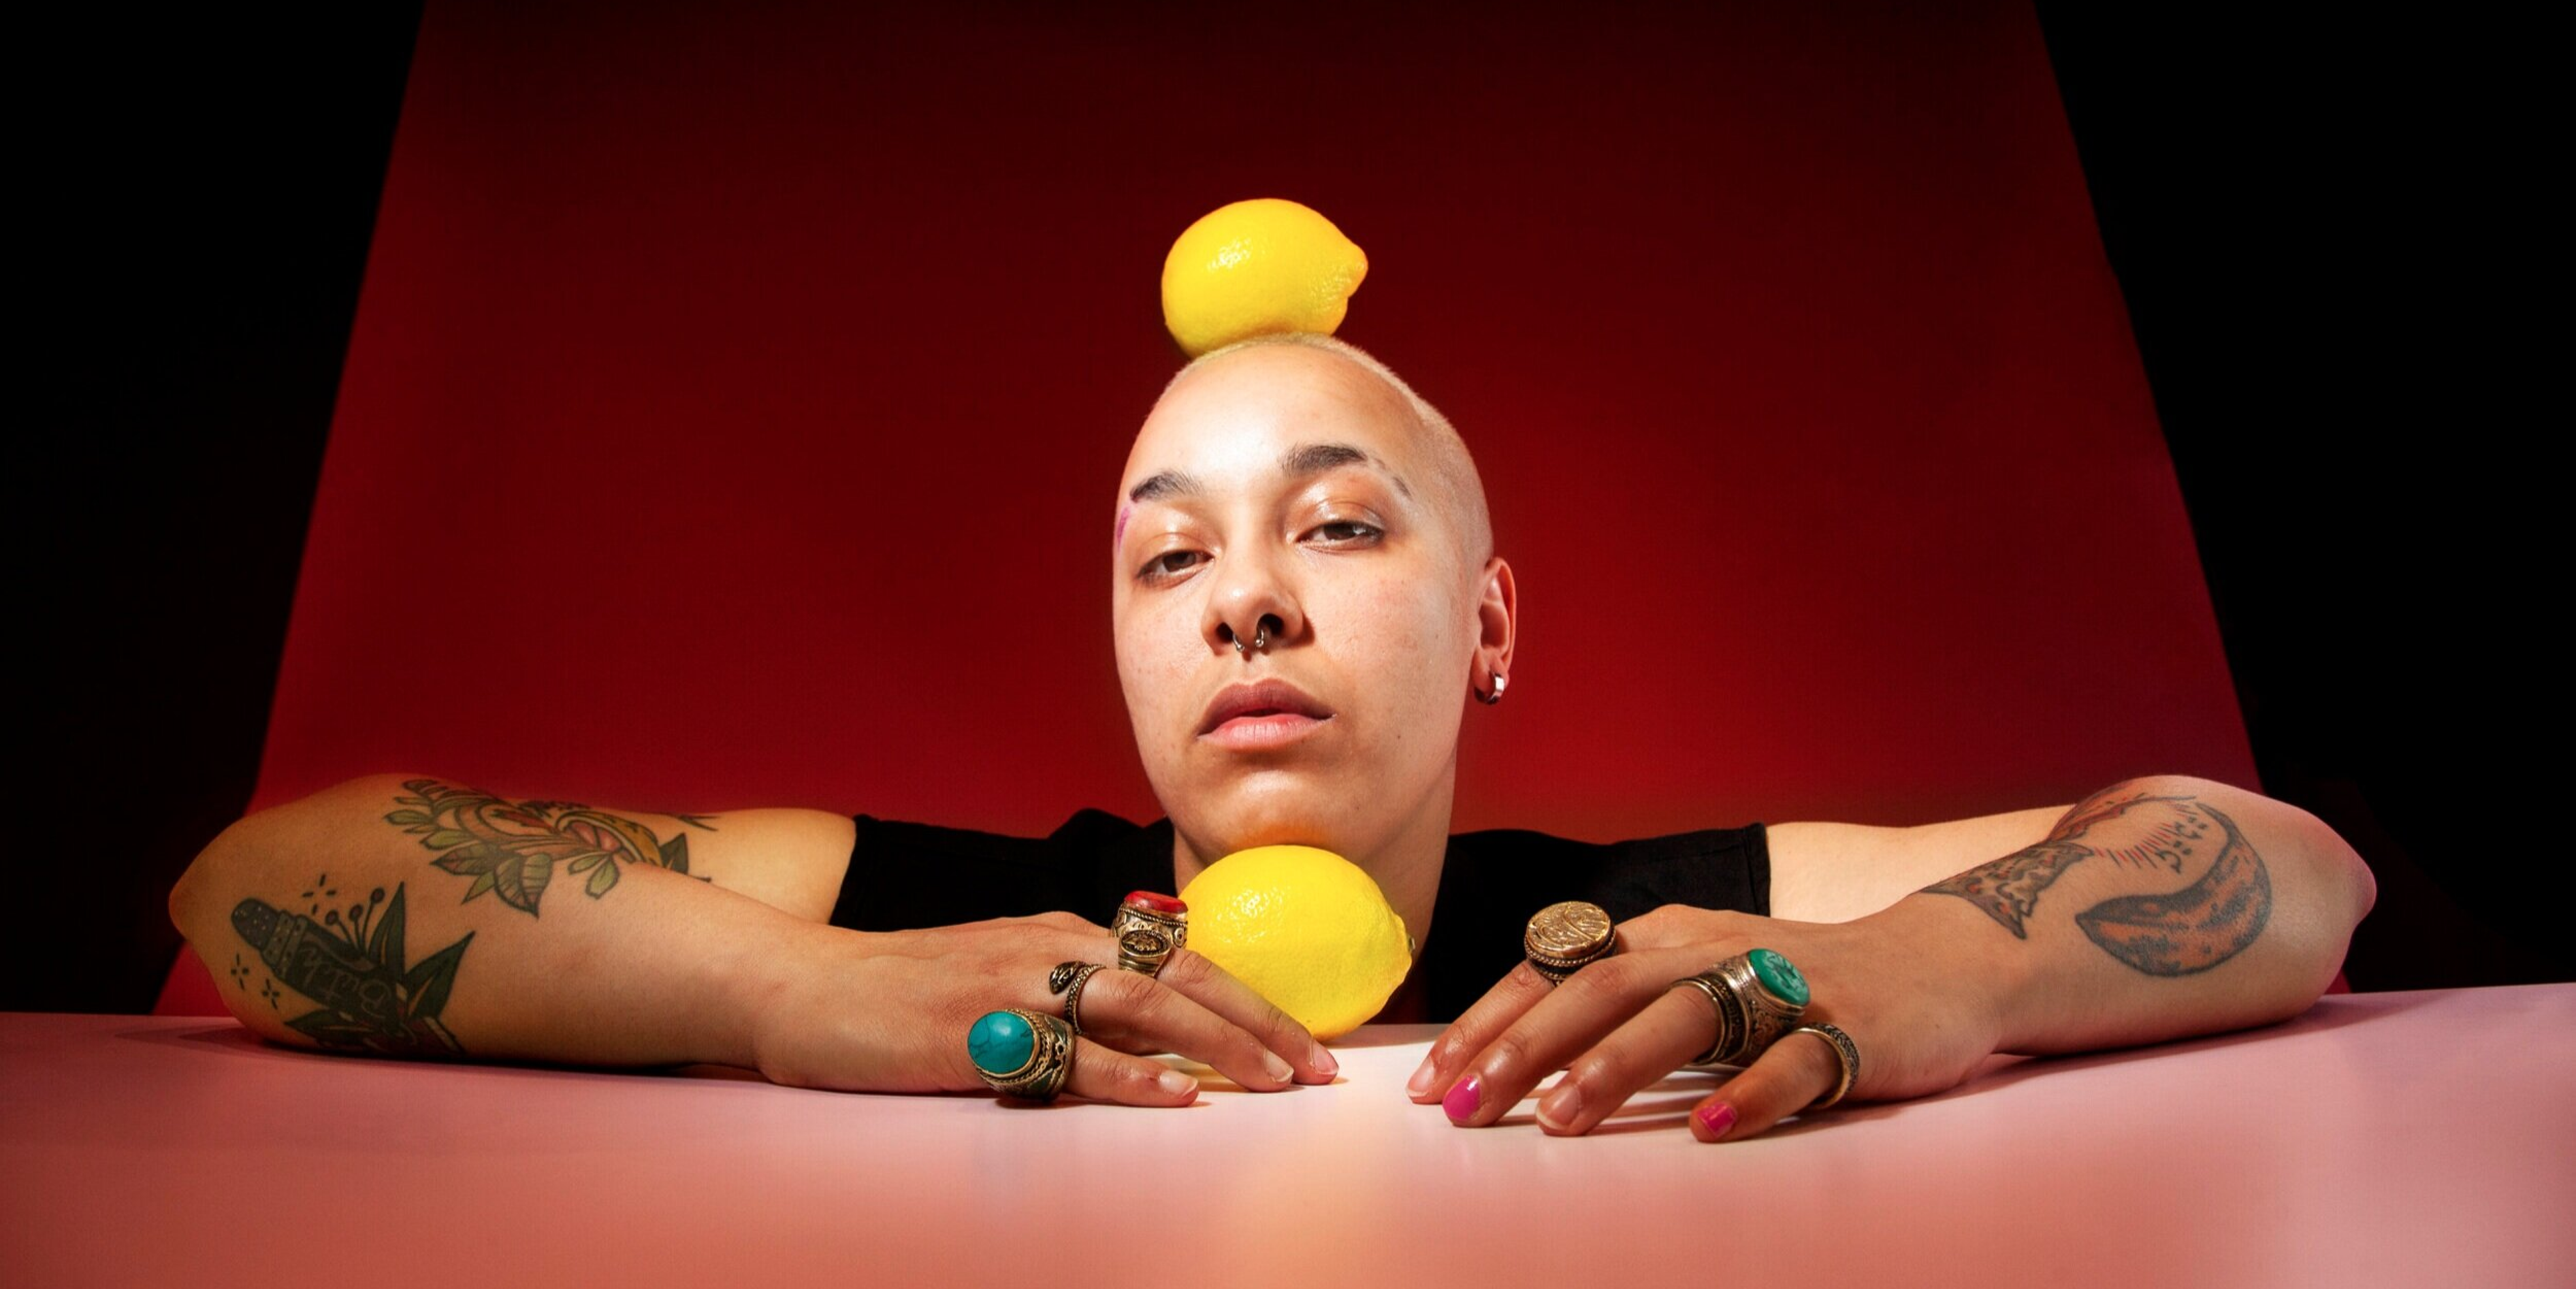 Mika Onyx Johnson poses with a lemon in a promotional shot for Pink Lemonade